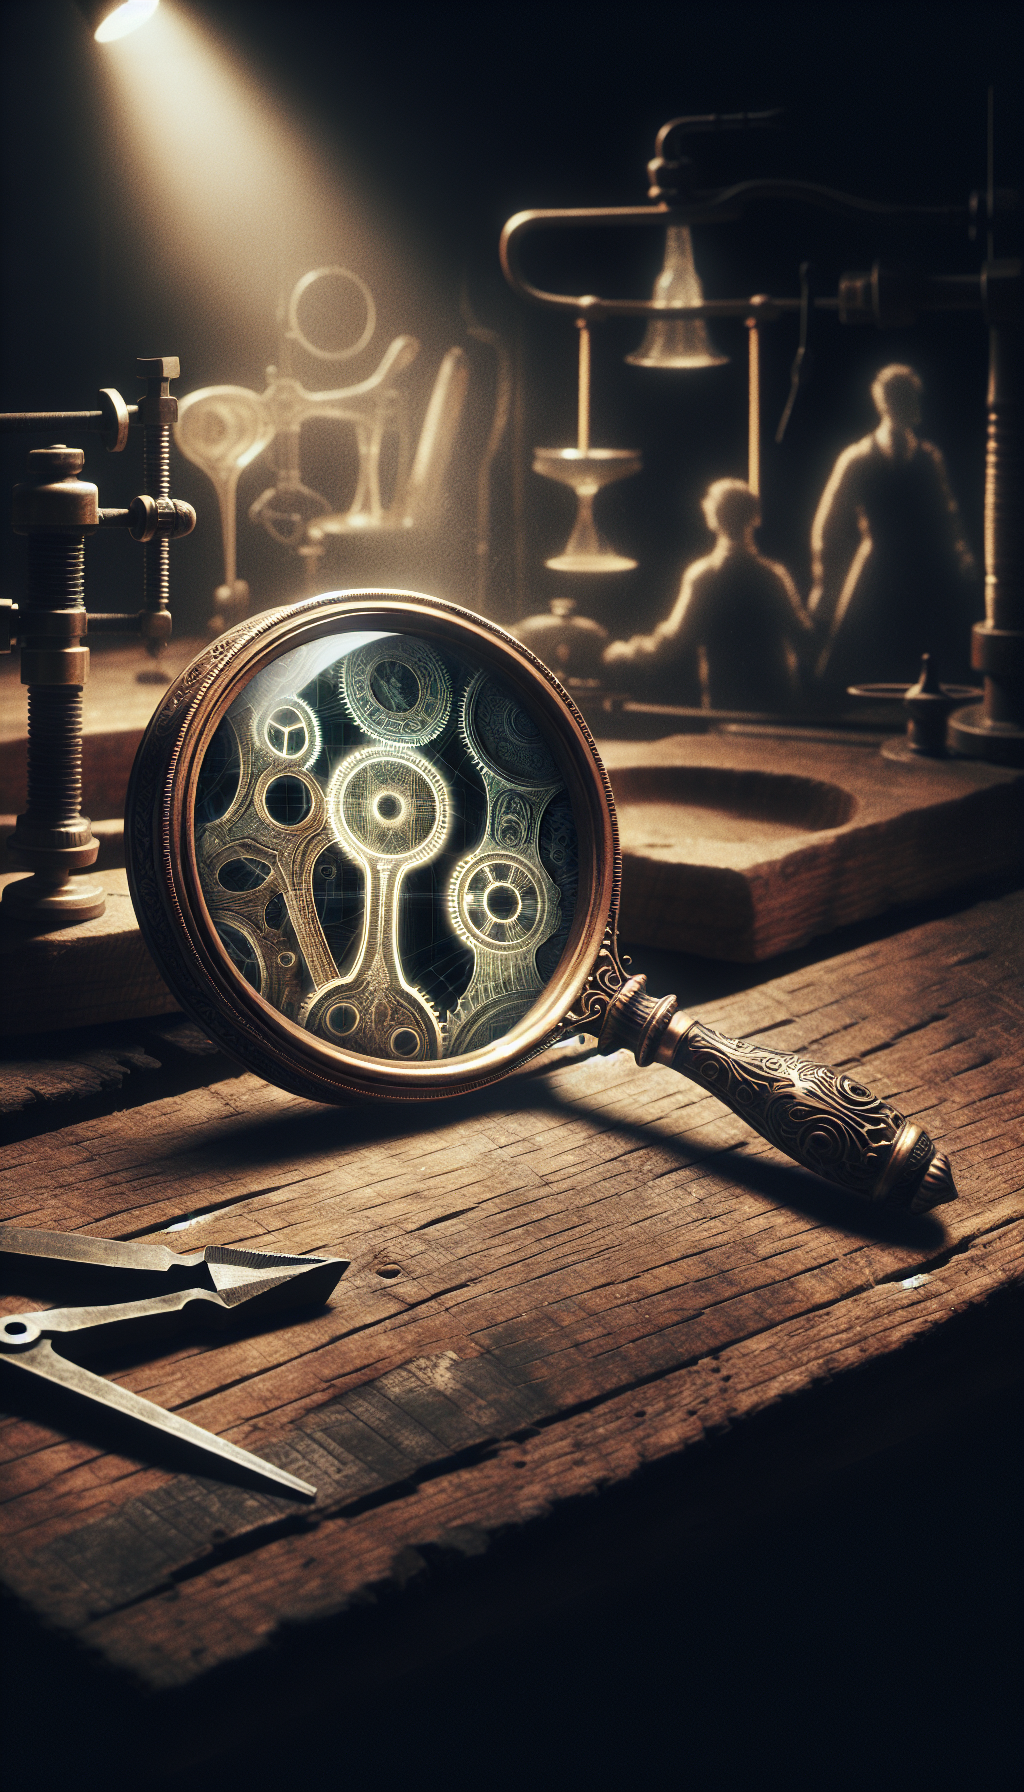 An intricately crafted steampunk-style magnifying glass hovers above a whimsical, antique wooden workbench, revealing spectral outlines of enigmatic old-time tools in its wake. This spectral reveal contrasts against the vividly textured woodgrain, while shadowy figures of craftsmen from the past subtly incorporate their trades around the ethereal tool silhouettes, adding depth and mystery to the art of historical craftsmanship discovery.